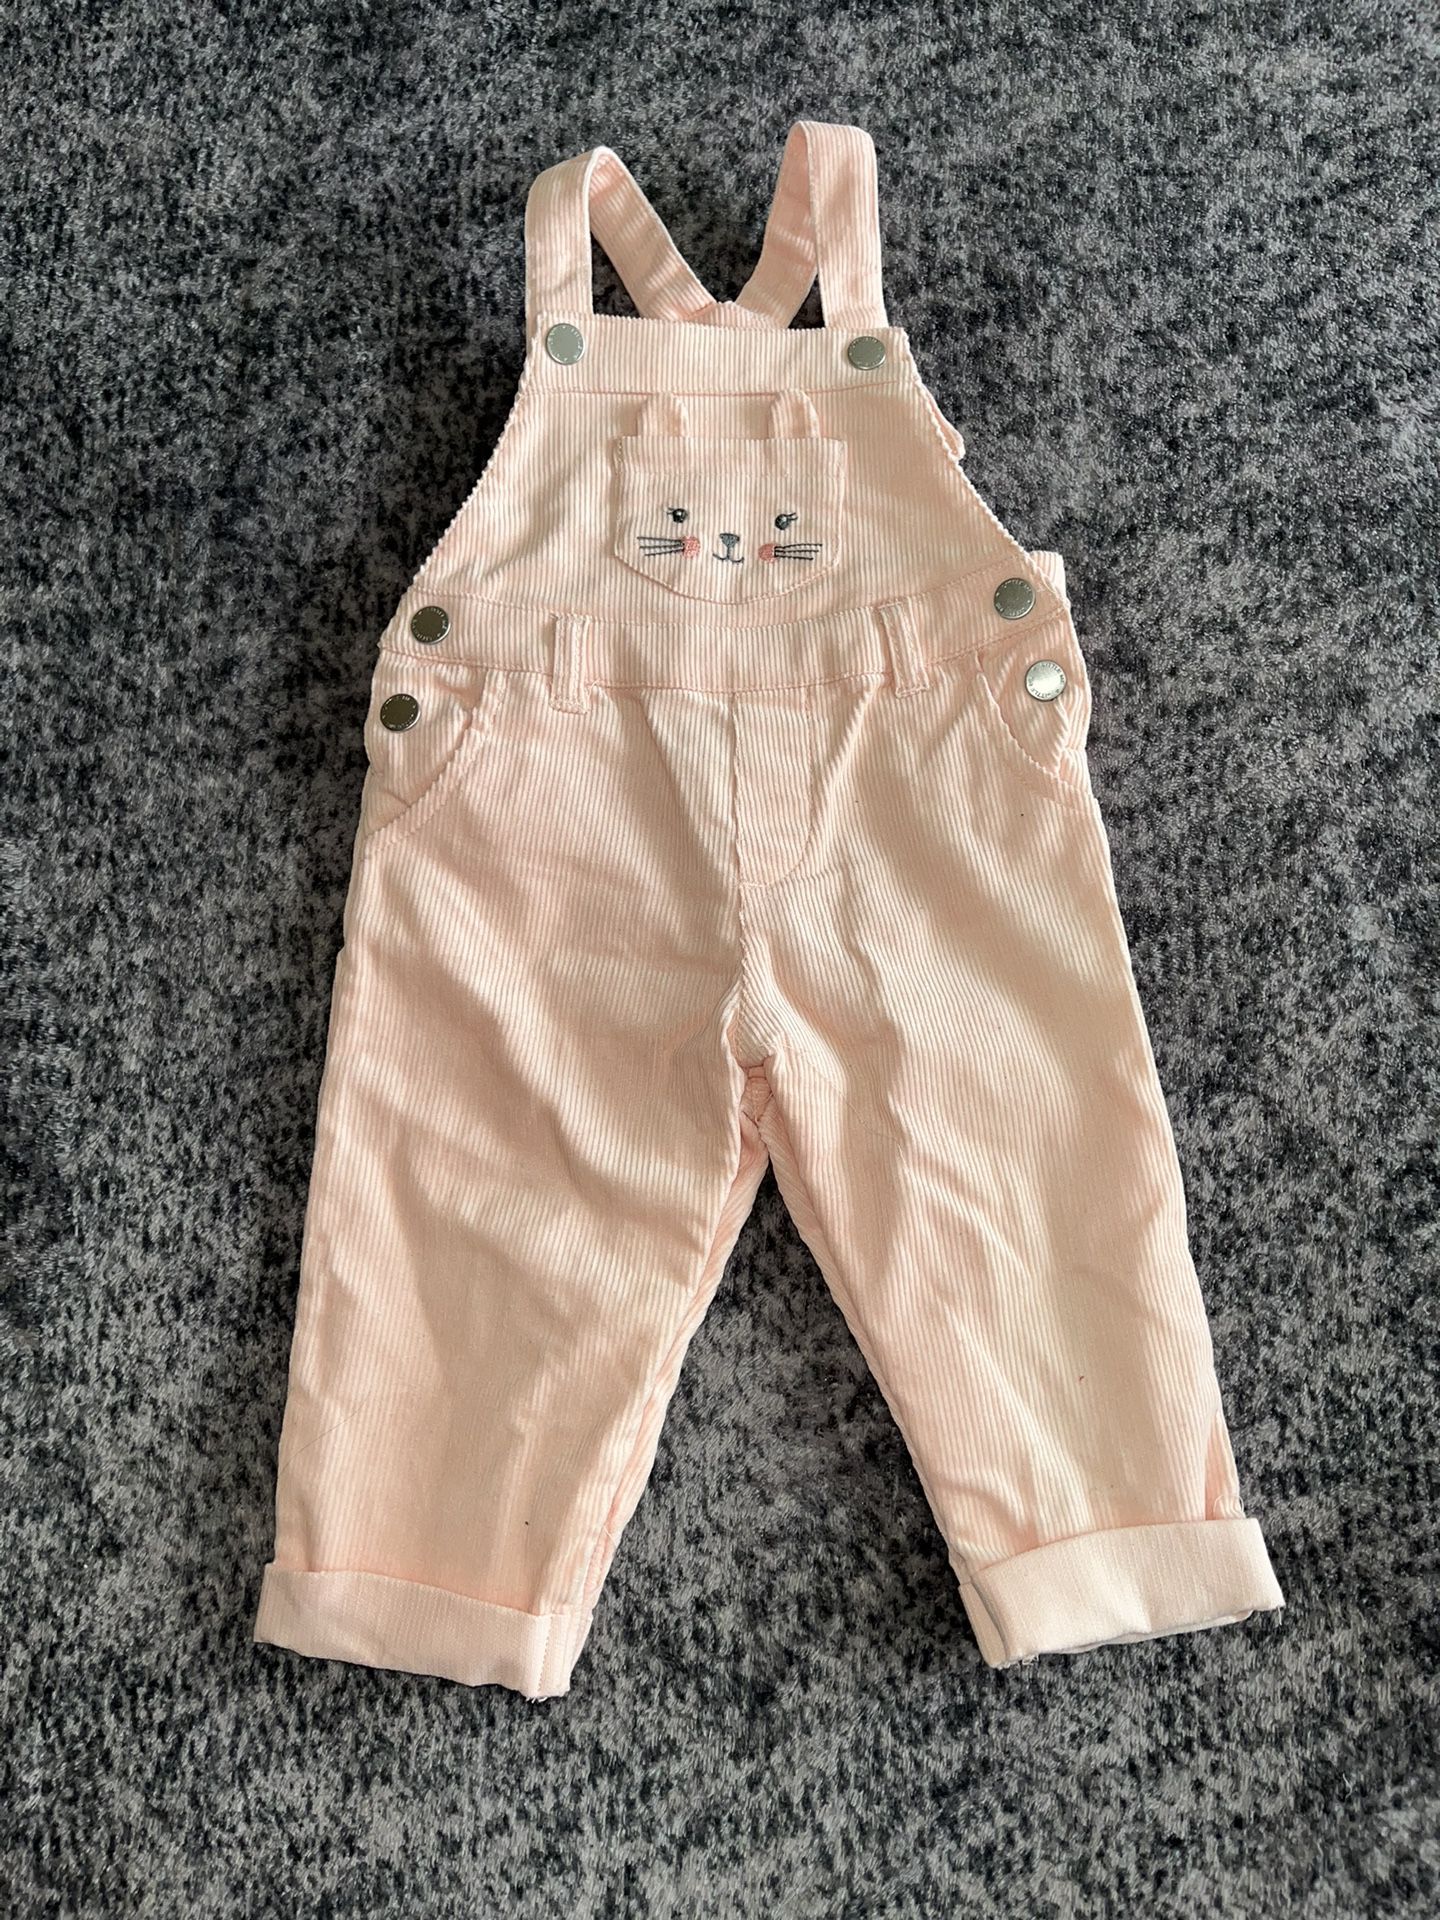 Super Cute Baby Girl Pink Bunny Corduroy Overalls Size 12M